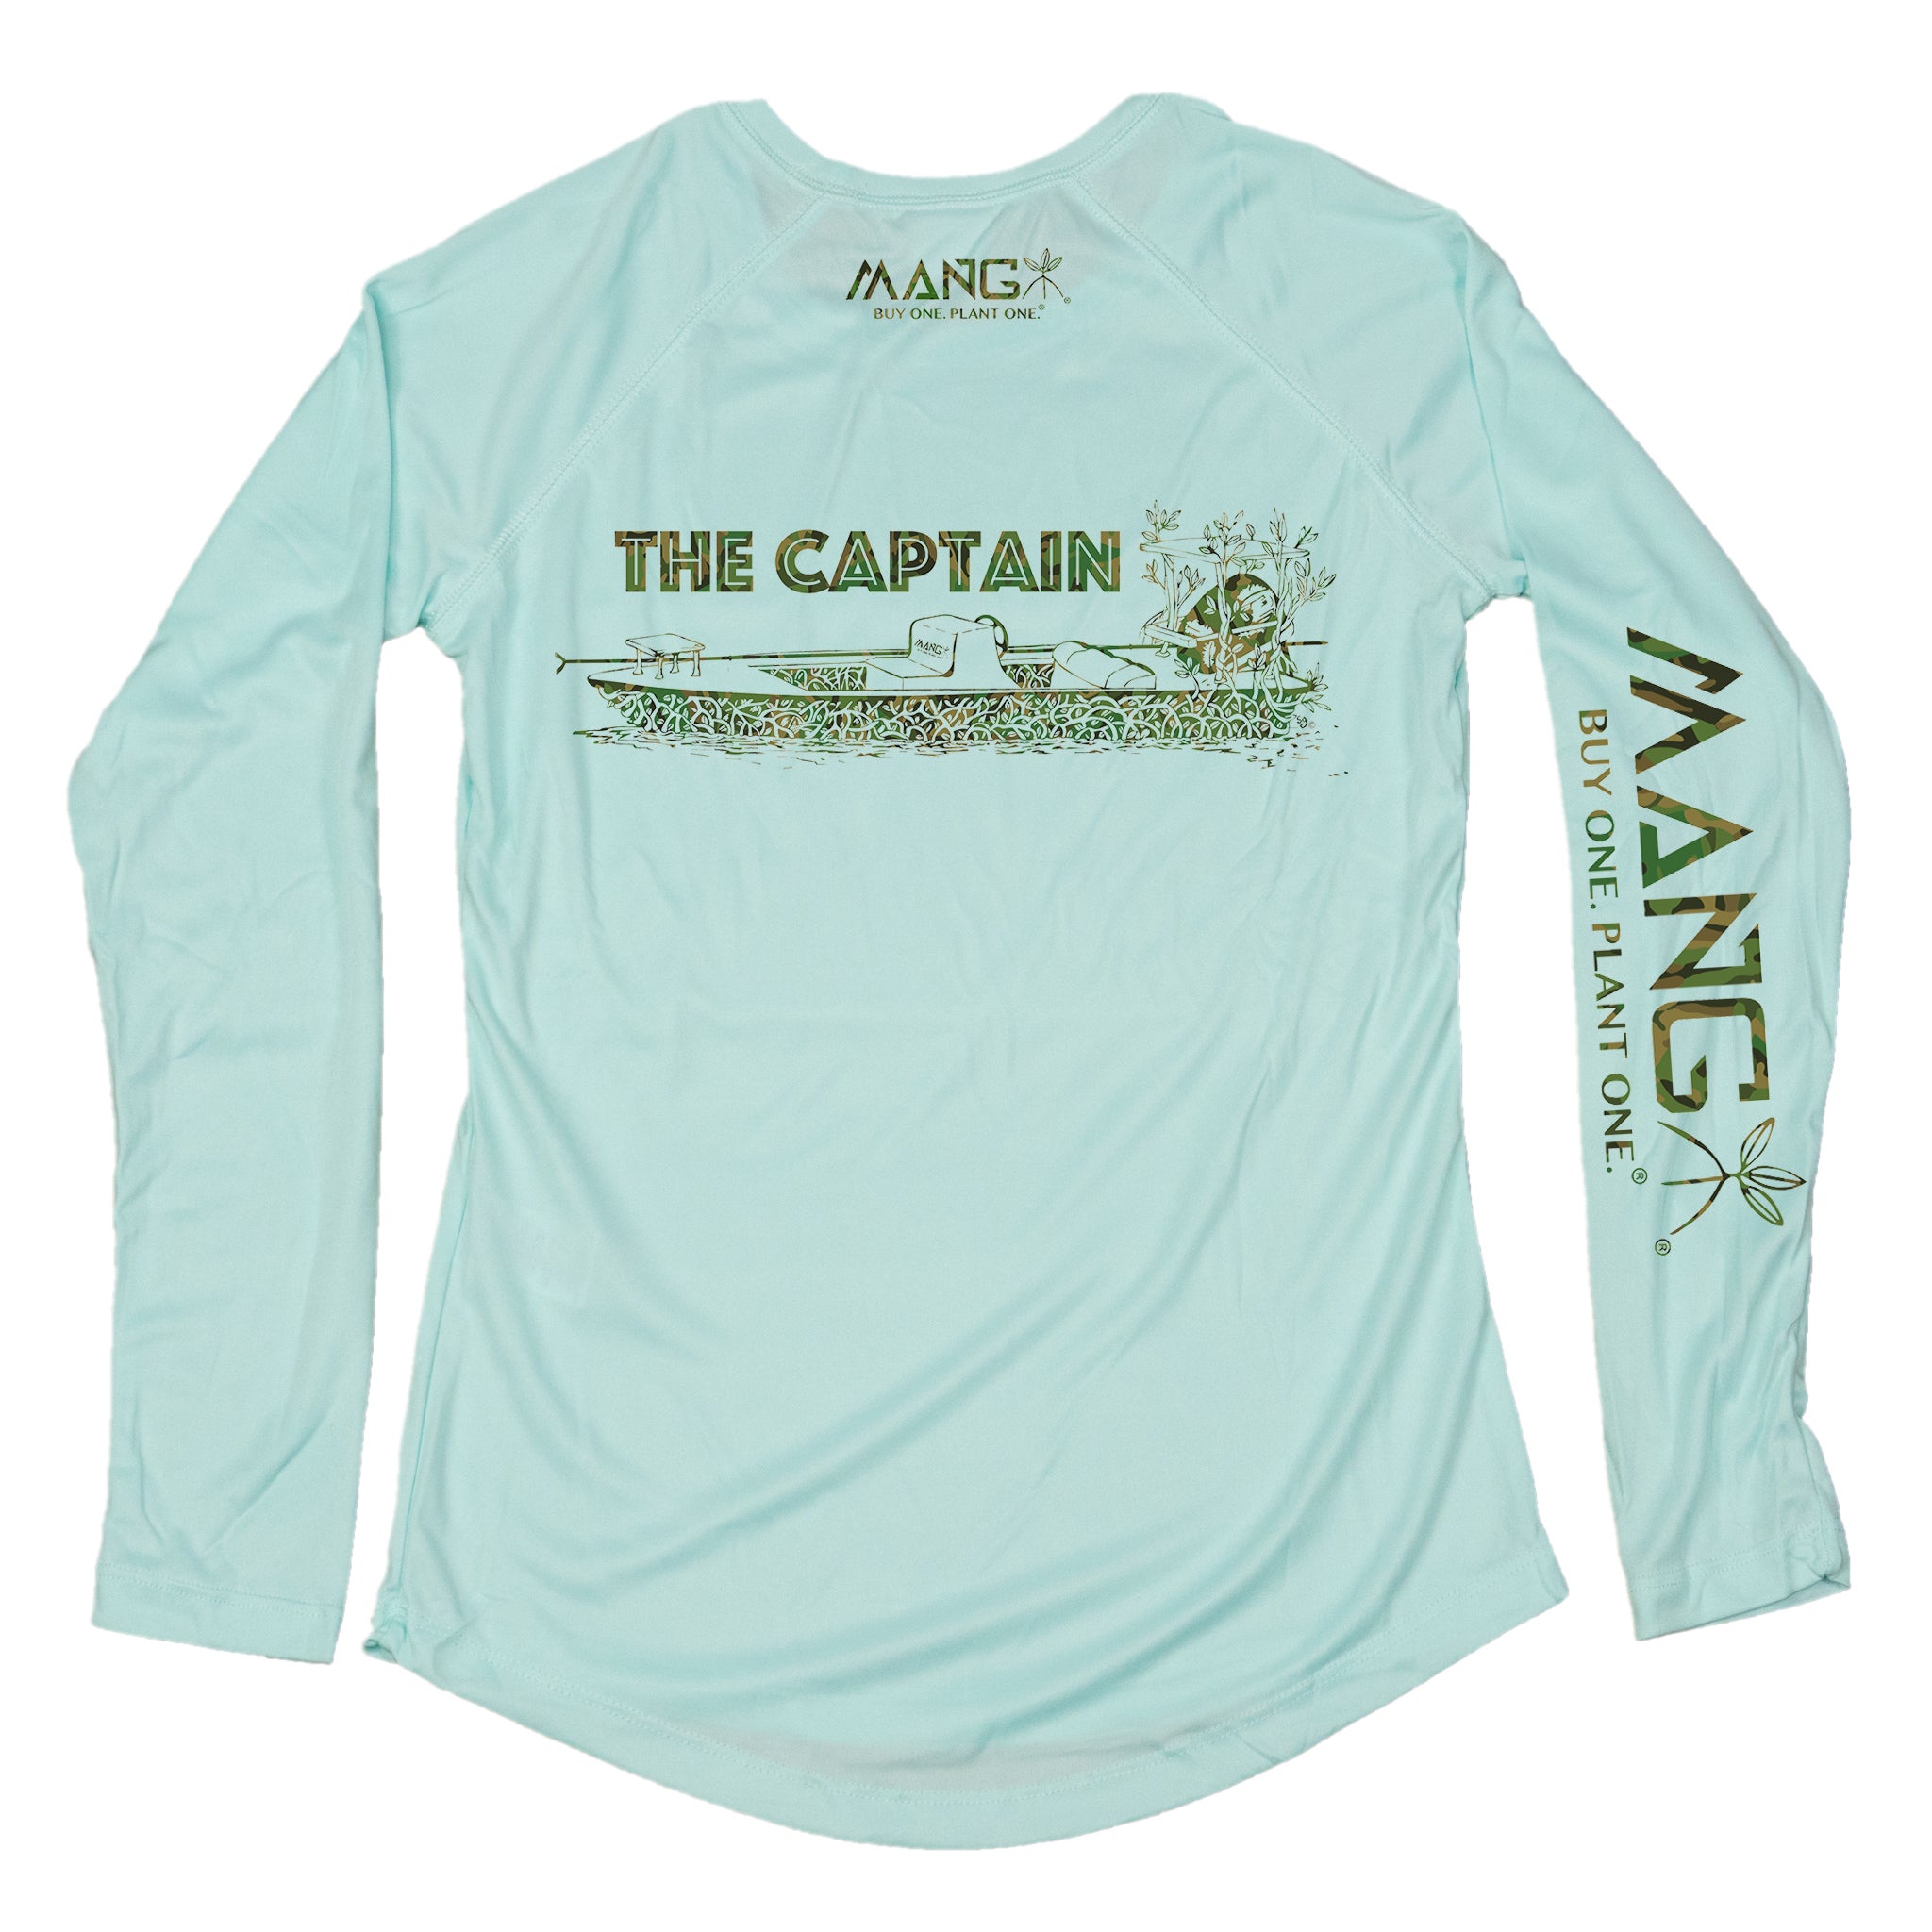 MANG The Captain - Women's - LS - XS-Seagrass